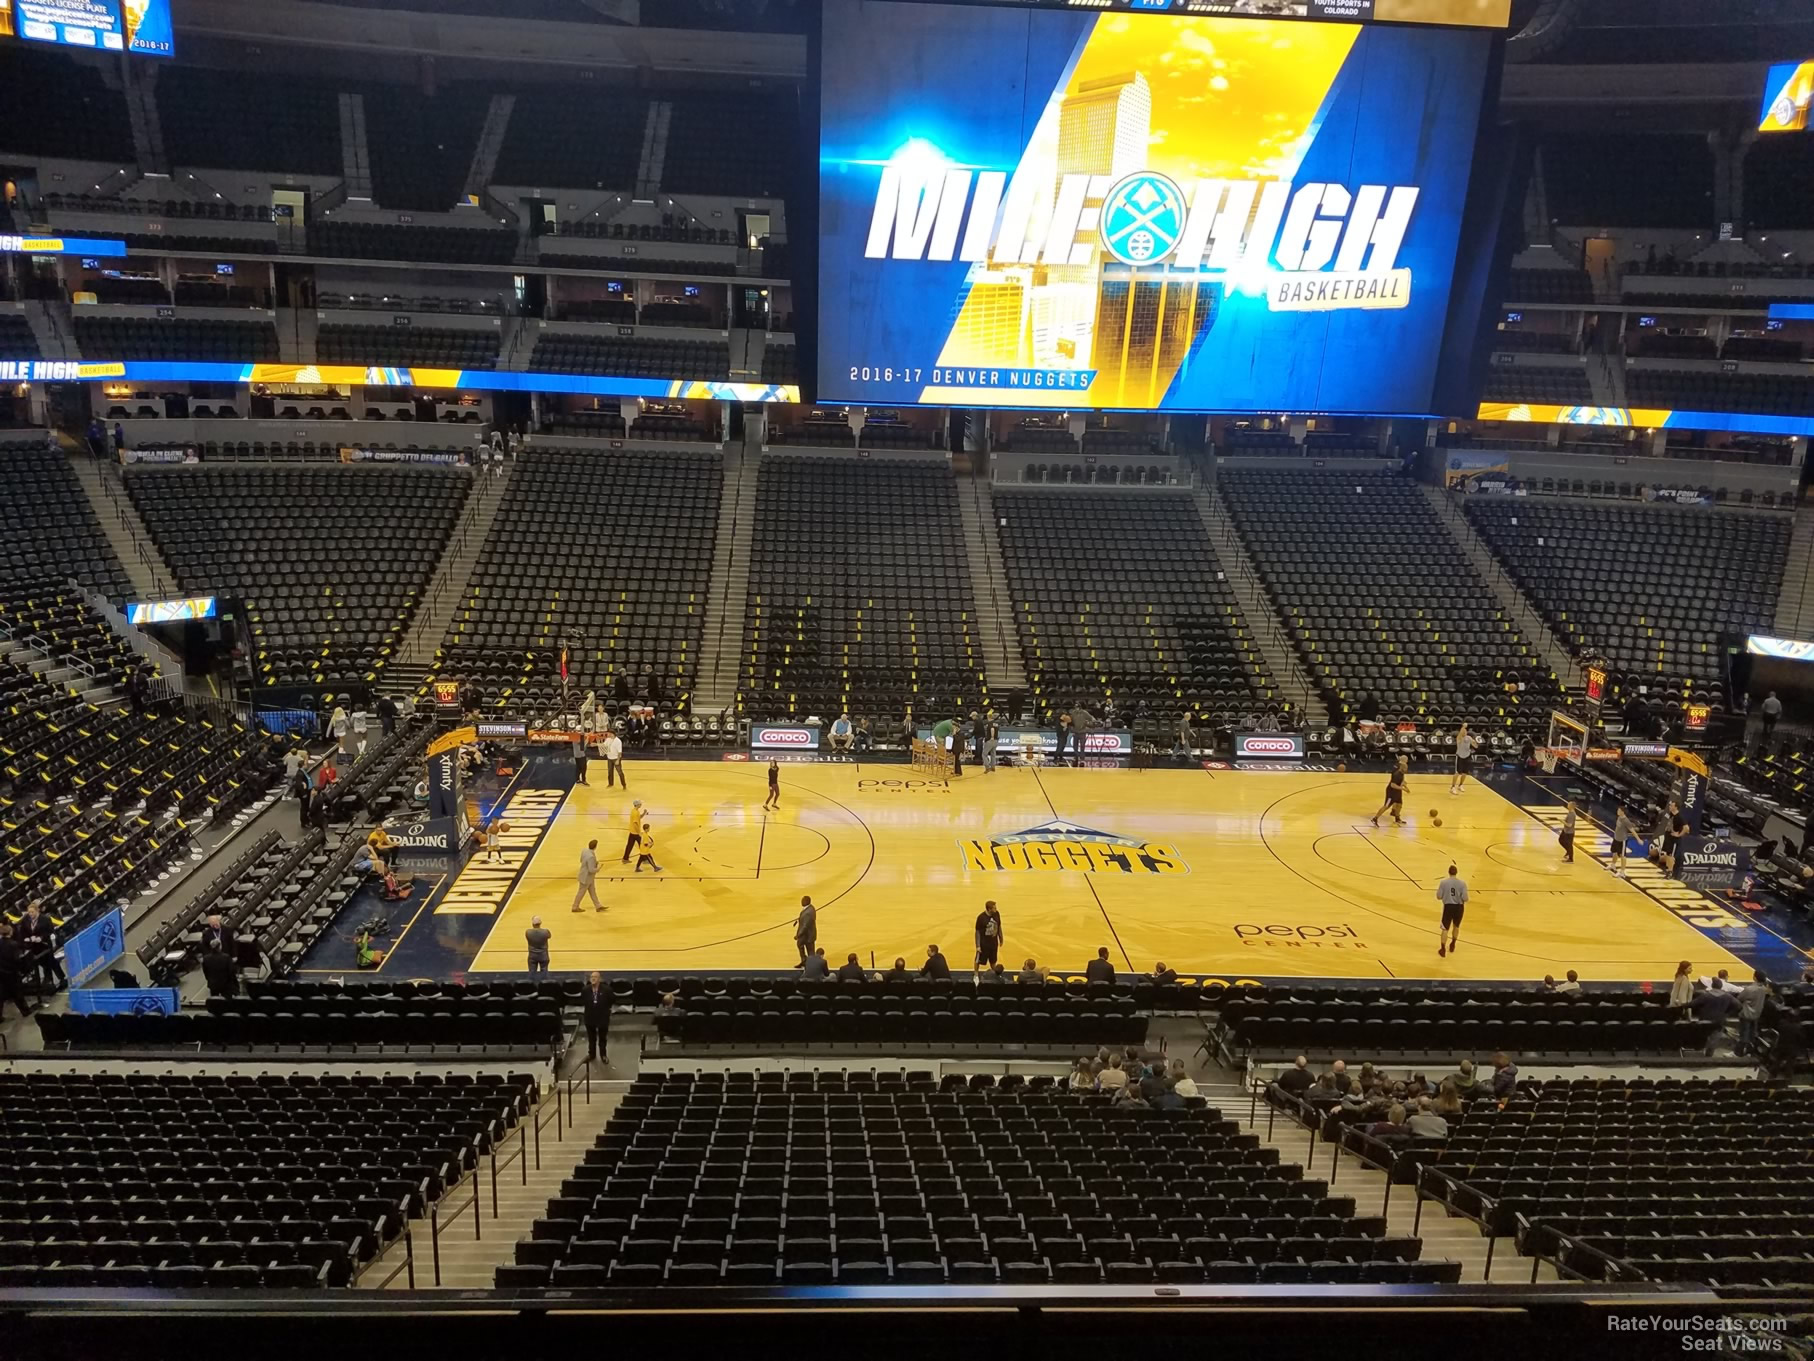 section 232, row 4 seat view  for basketball - ball arena